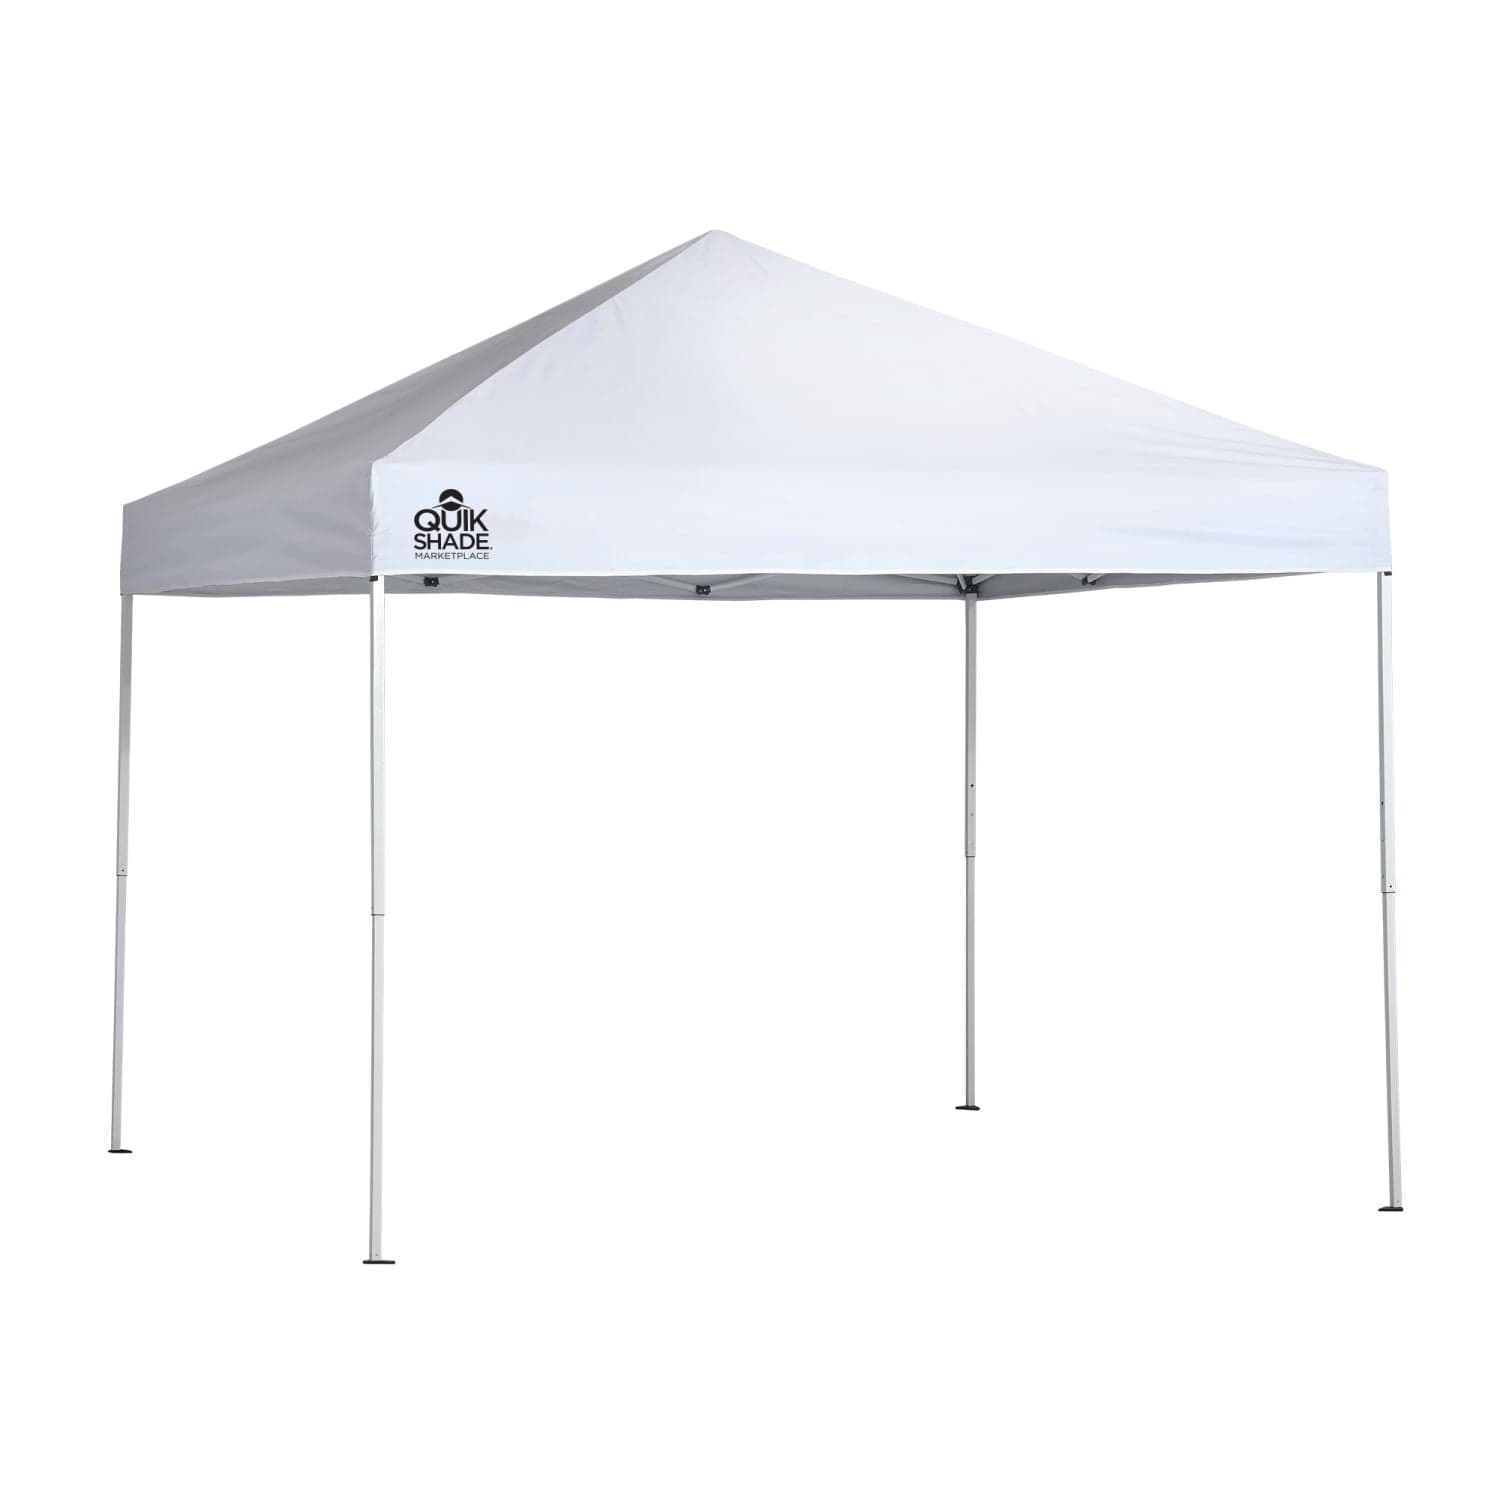 Quik Shade Pop Up Canopies Quik Shade | Marketplace MP100 10' x 10' Straight Leg Canopy - White 158685DS